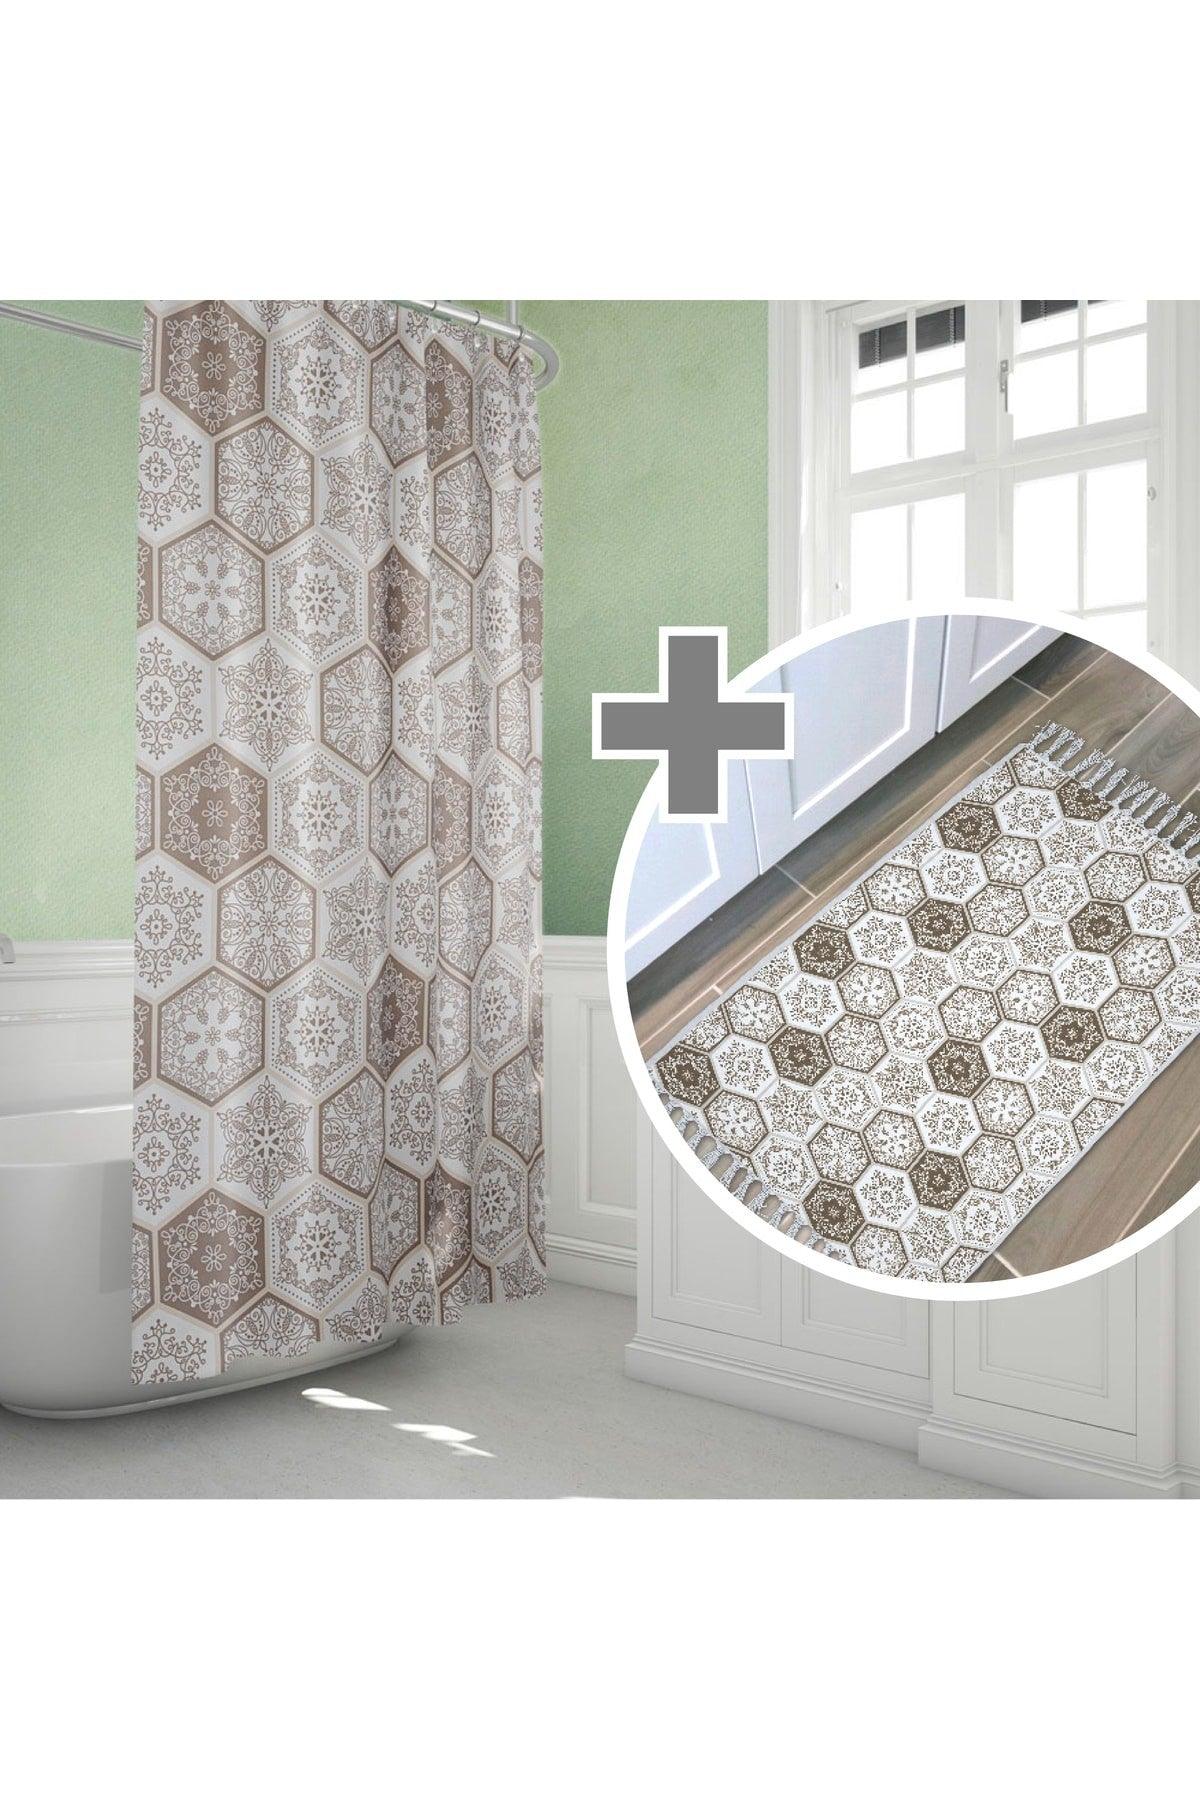 Brown Bath Mat And Bathroom Shower Curtain Set-Bath And Door Front Mat With Non-slip Base - Swordslife